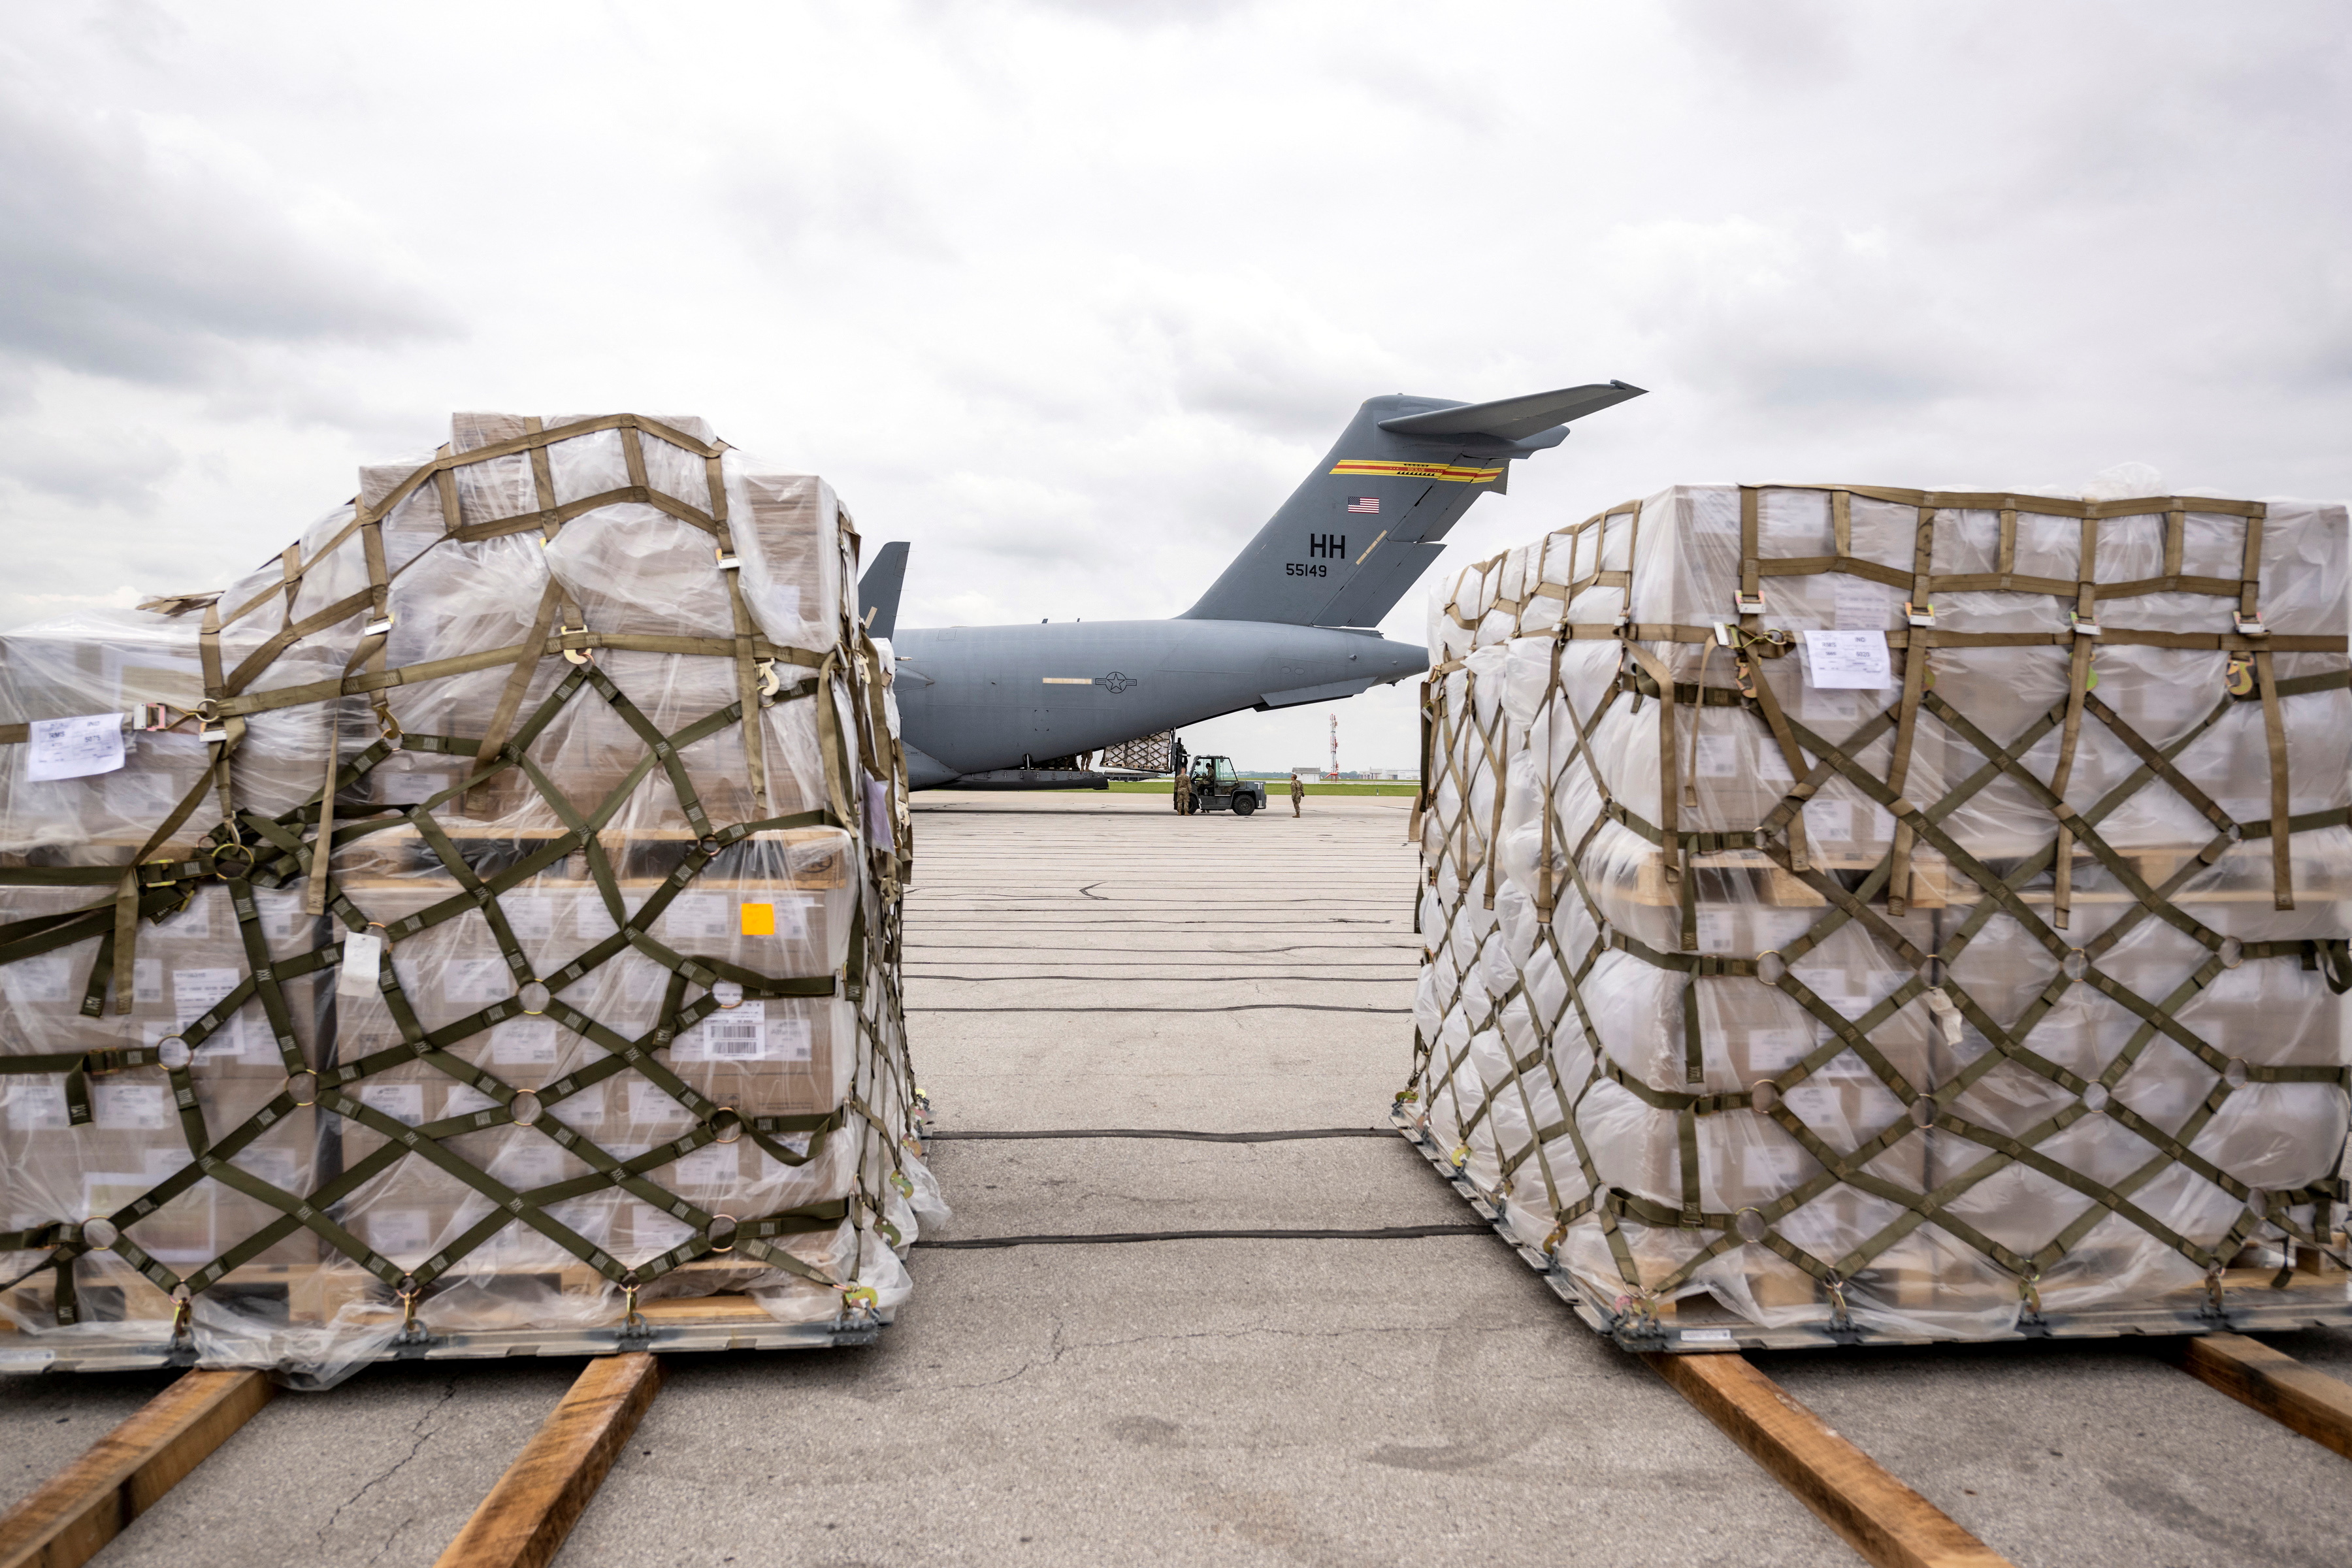 Crew members of an Air Force C-17 aircraft unload Nestle baby formula after its arrival from Ramstein Air Base